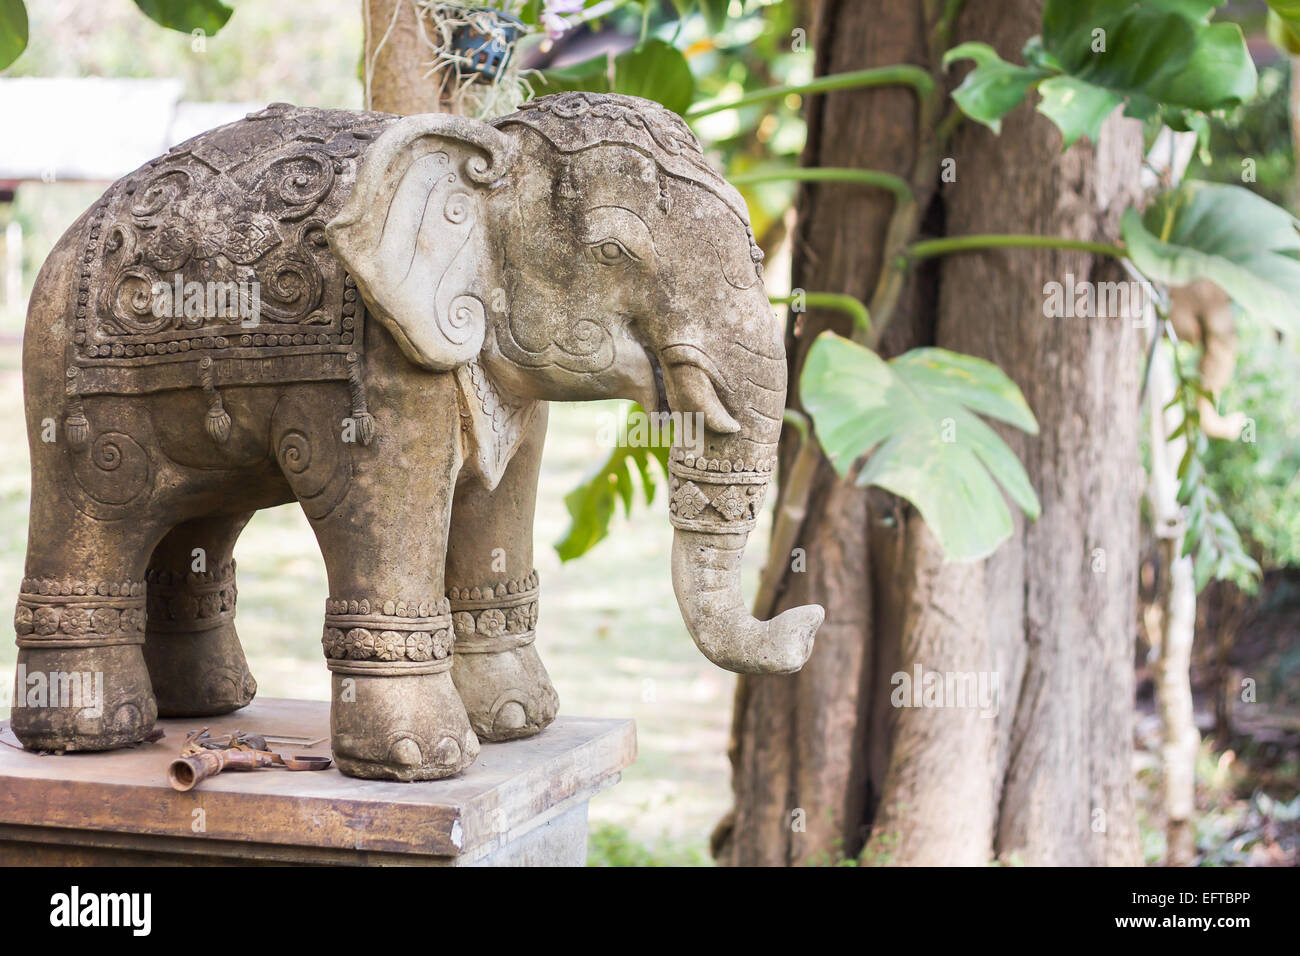 Elephant clay doll decorated in garden, stock photo Stock Photo